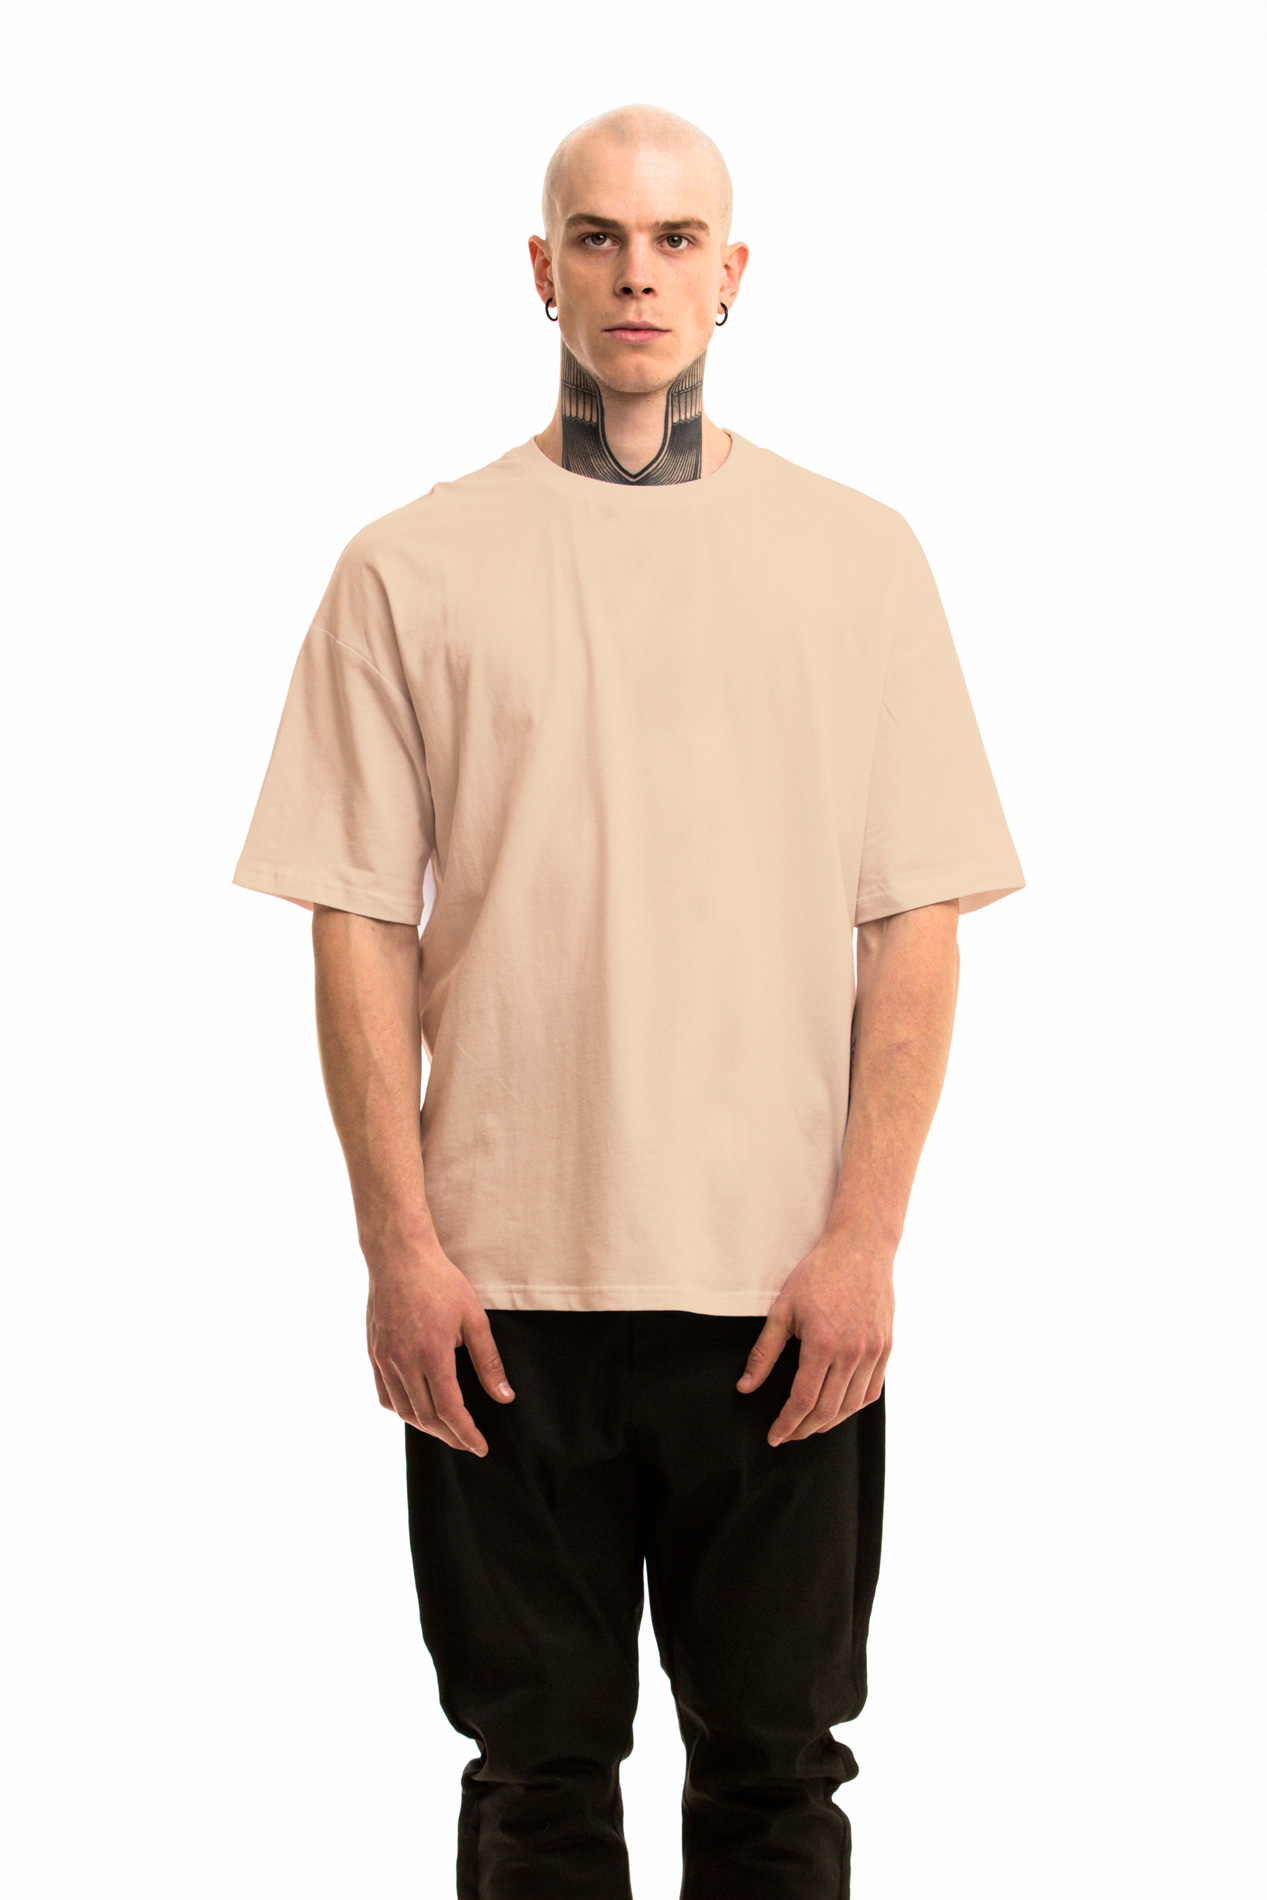 White oversize t-shirt by FINCH ...